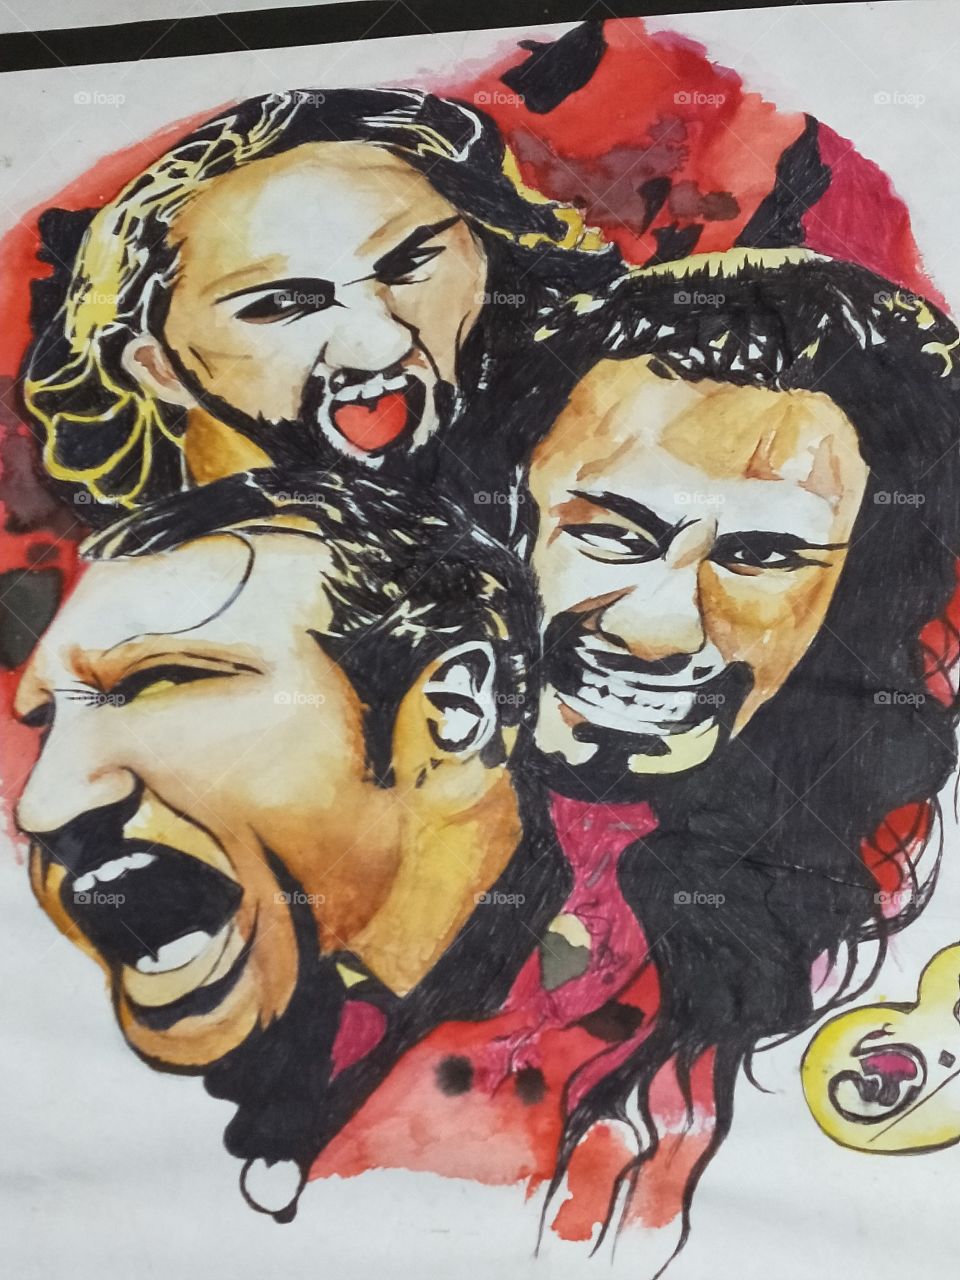 it's a painting just for kids.😃
the shield
Dean Ambrose
Roman Reigns
Seth rollins ..... 
if you watch World Wrestling Entertainment Then you know these three gentleman..